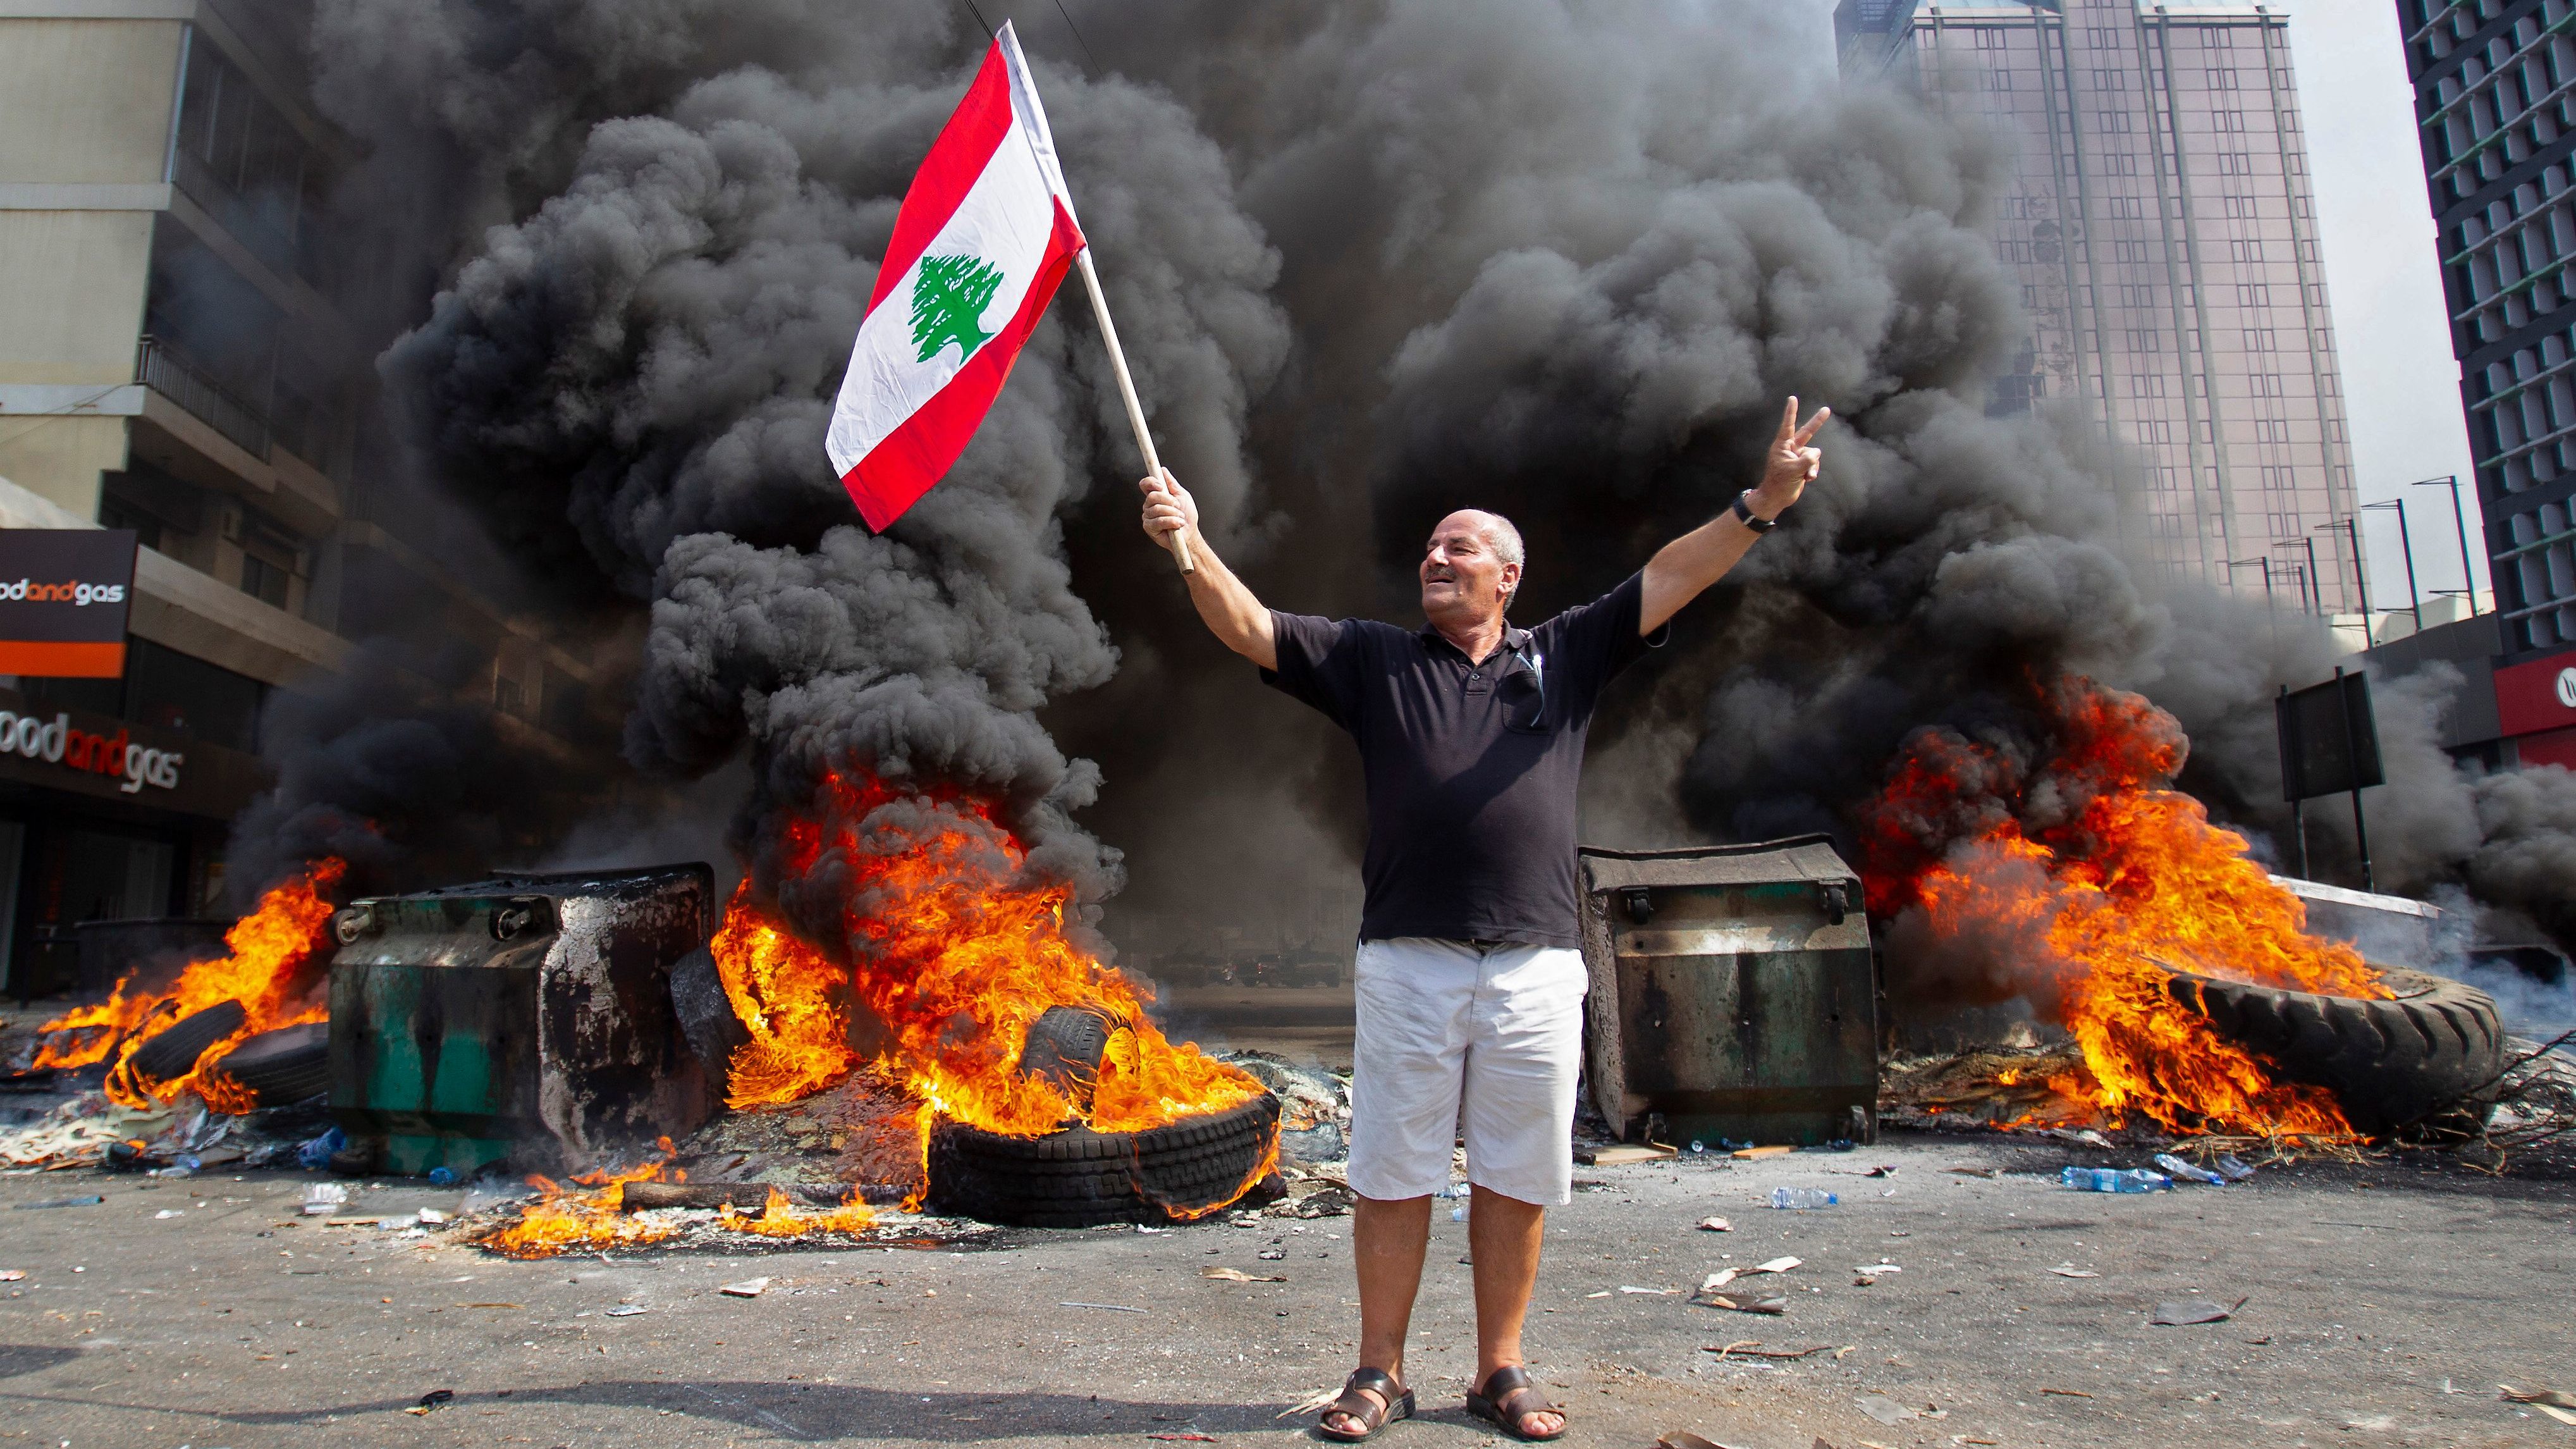 People in Lebanon Stage Second Day of Anti-government Protests